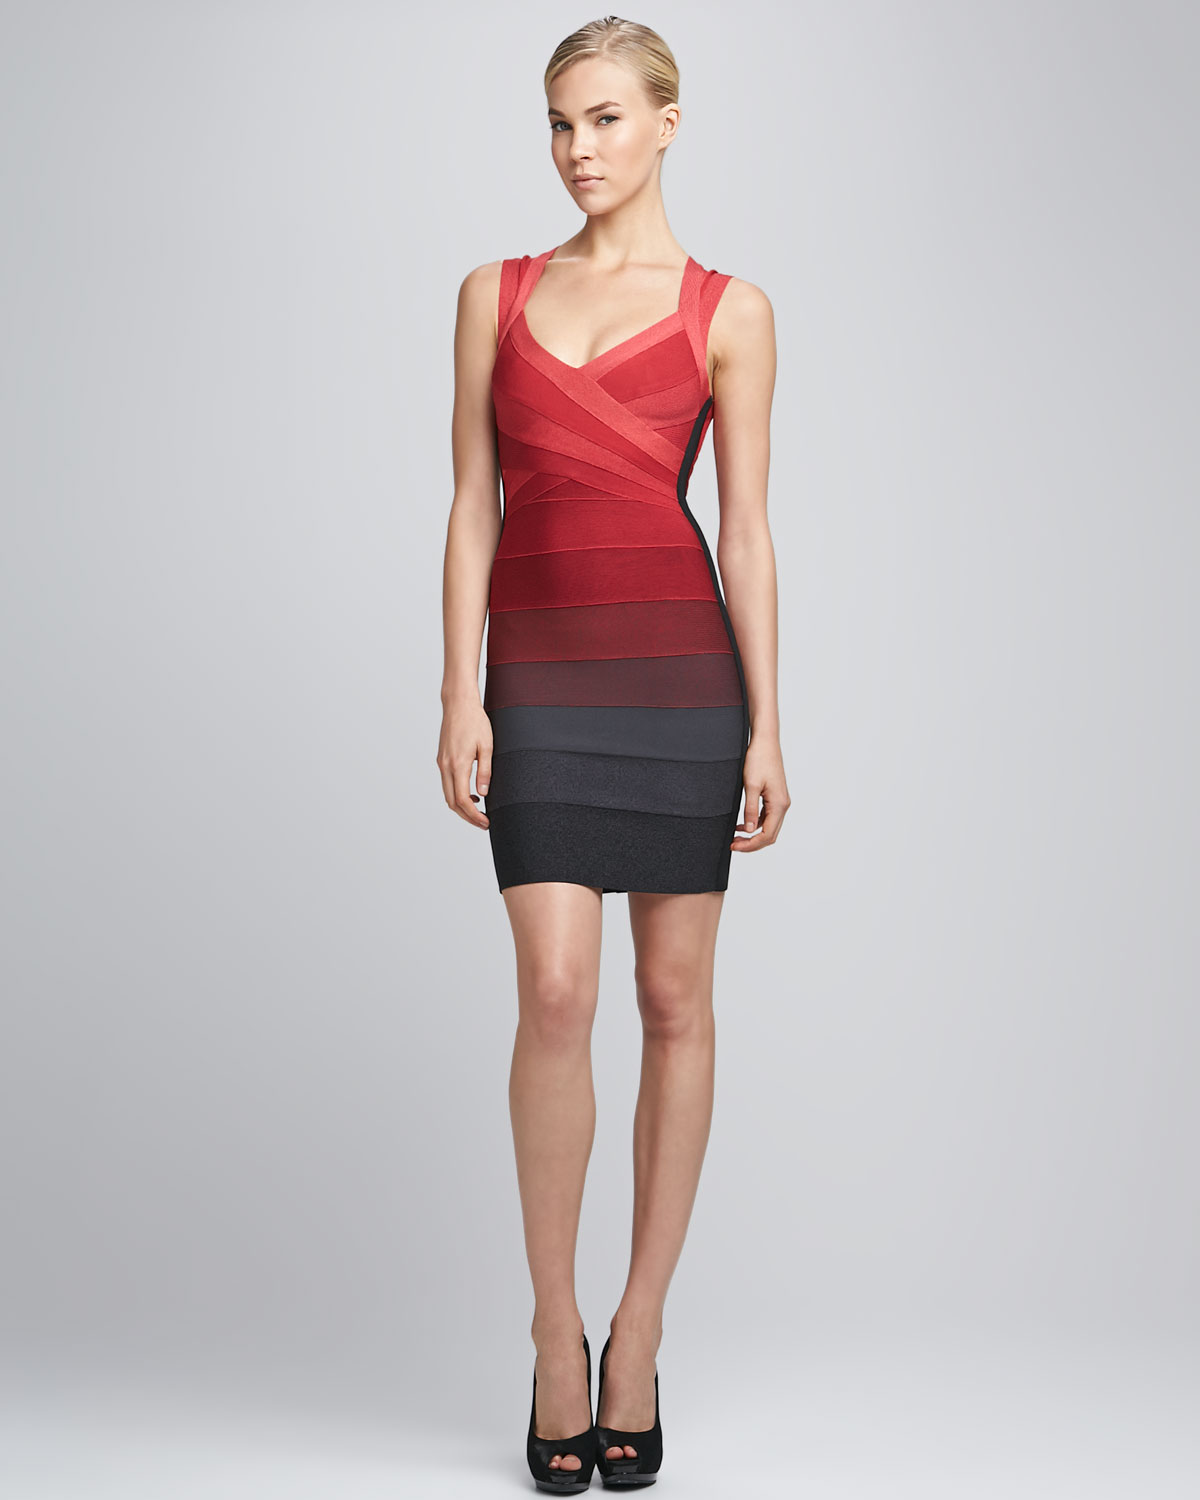 Lyst - Hervé léger Ombre Crossneck Bandage Dress Red in Red